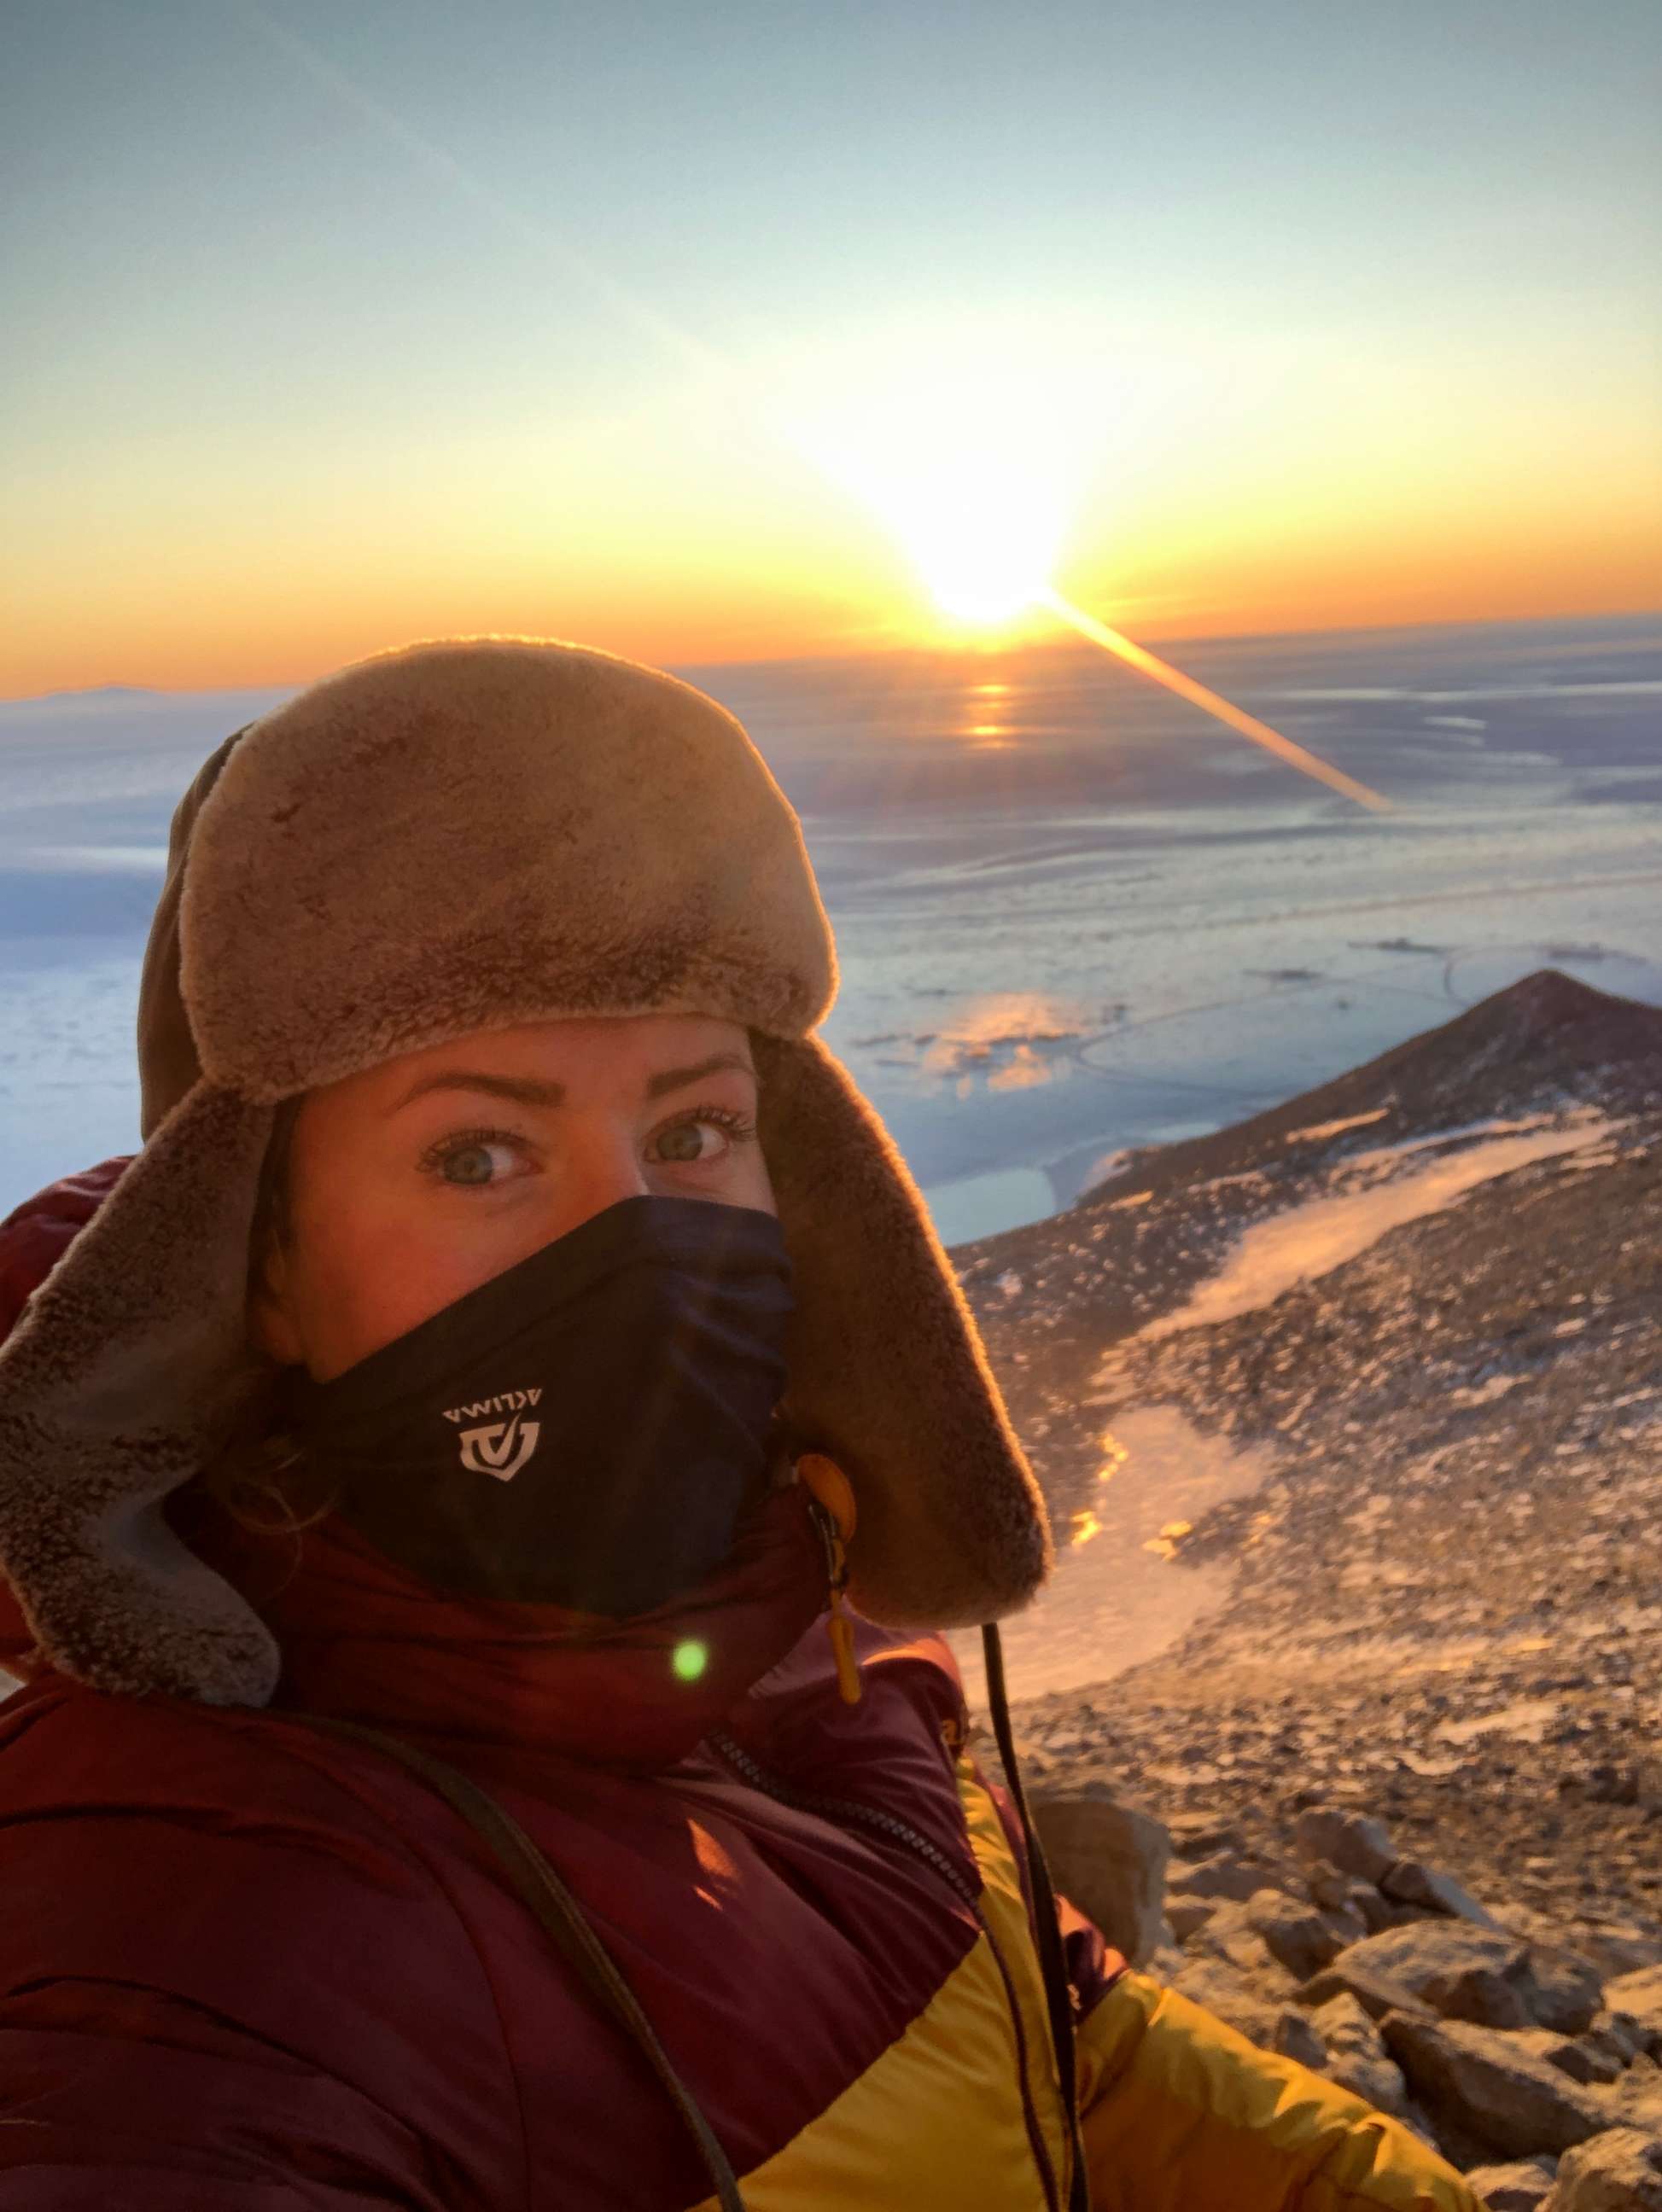 PHOTO: Karin Jansdotter is living what she calls "a dream" while working as a chef at Troll, a remote Norwegian scientific-research base in Antarctica.